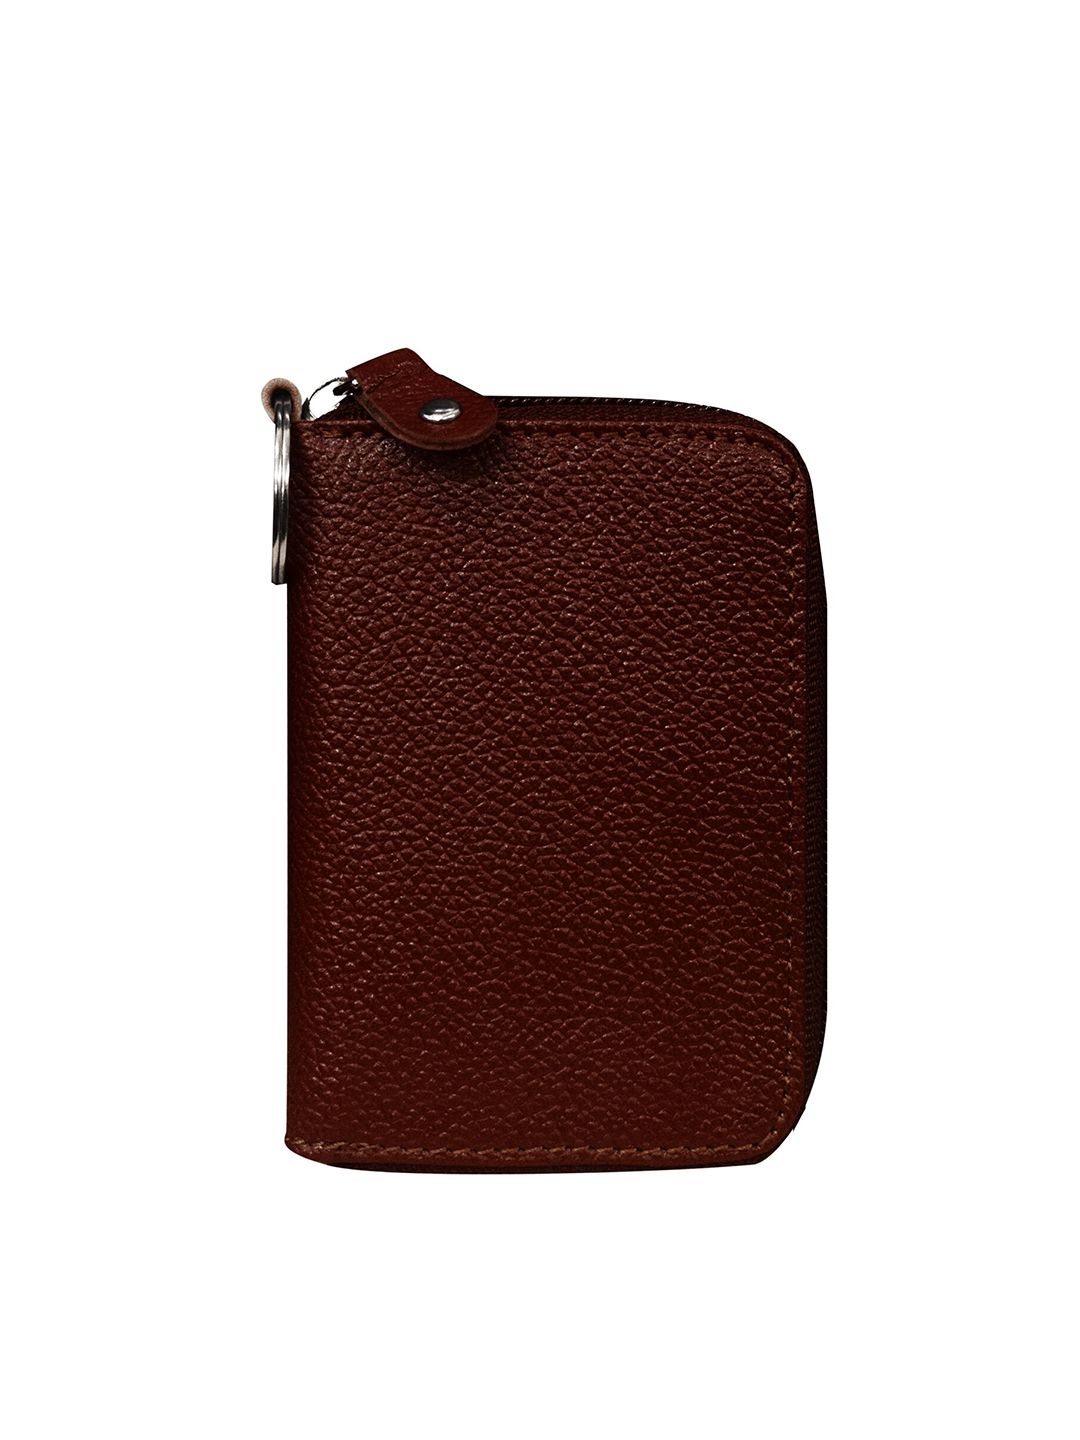 ABYS Brown Leather Card Holder Price in India